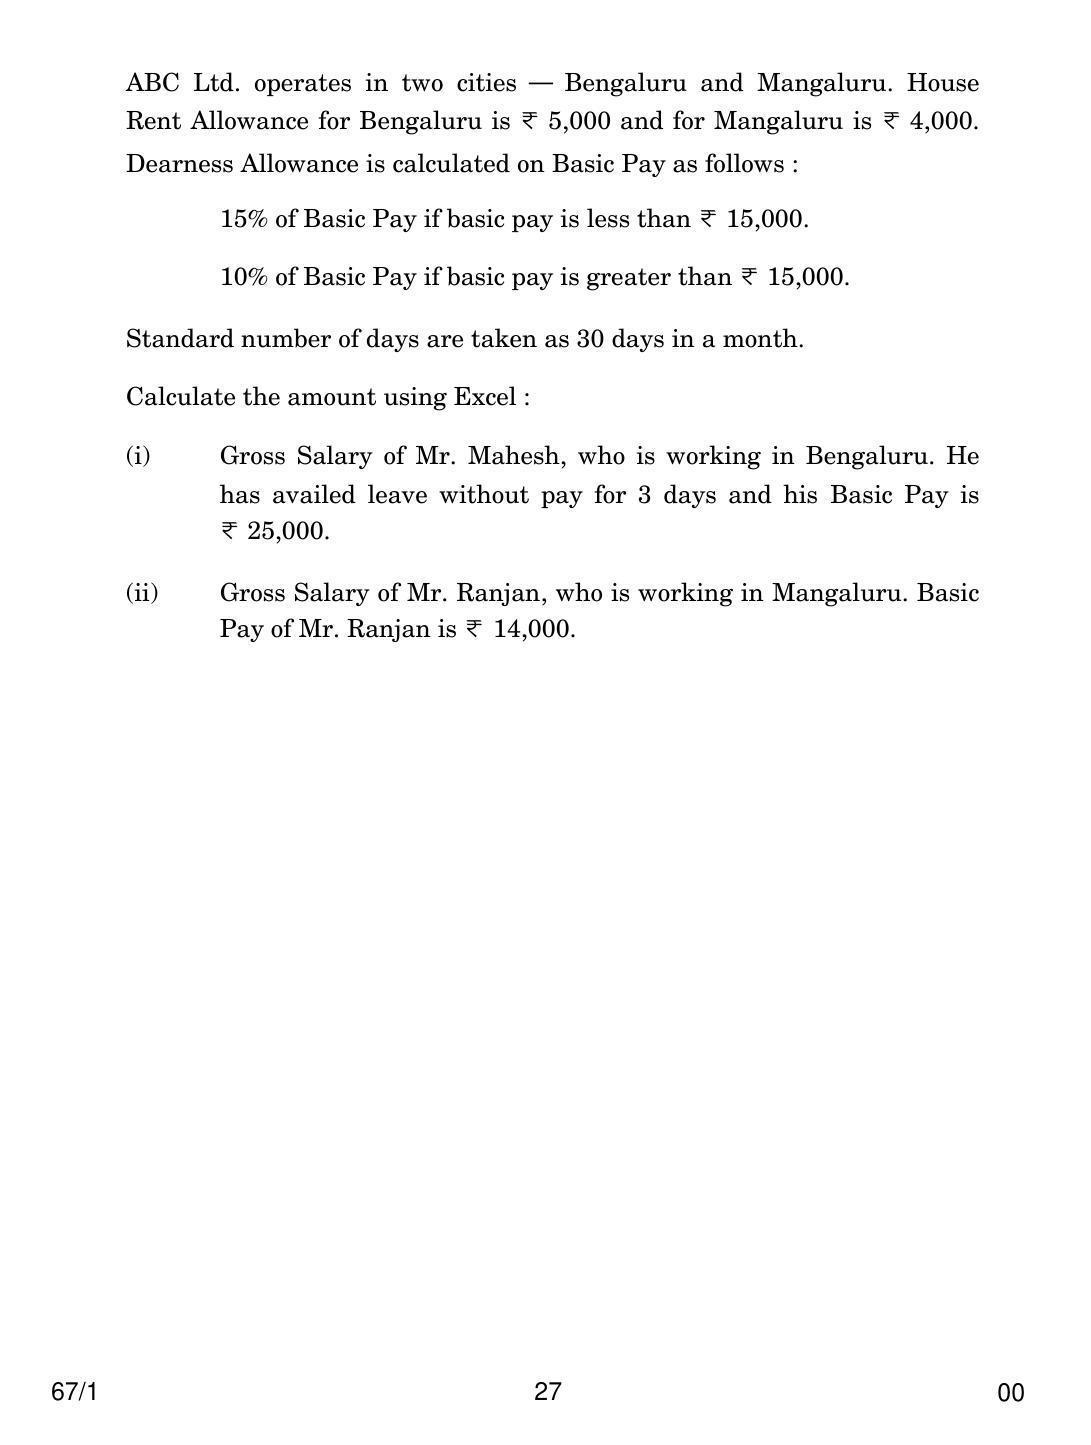 CBSE Class 12 67-1 ACCOUNTANCY 2018 Question Paper - Page 27